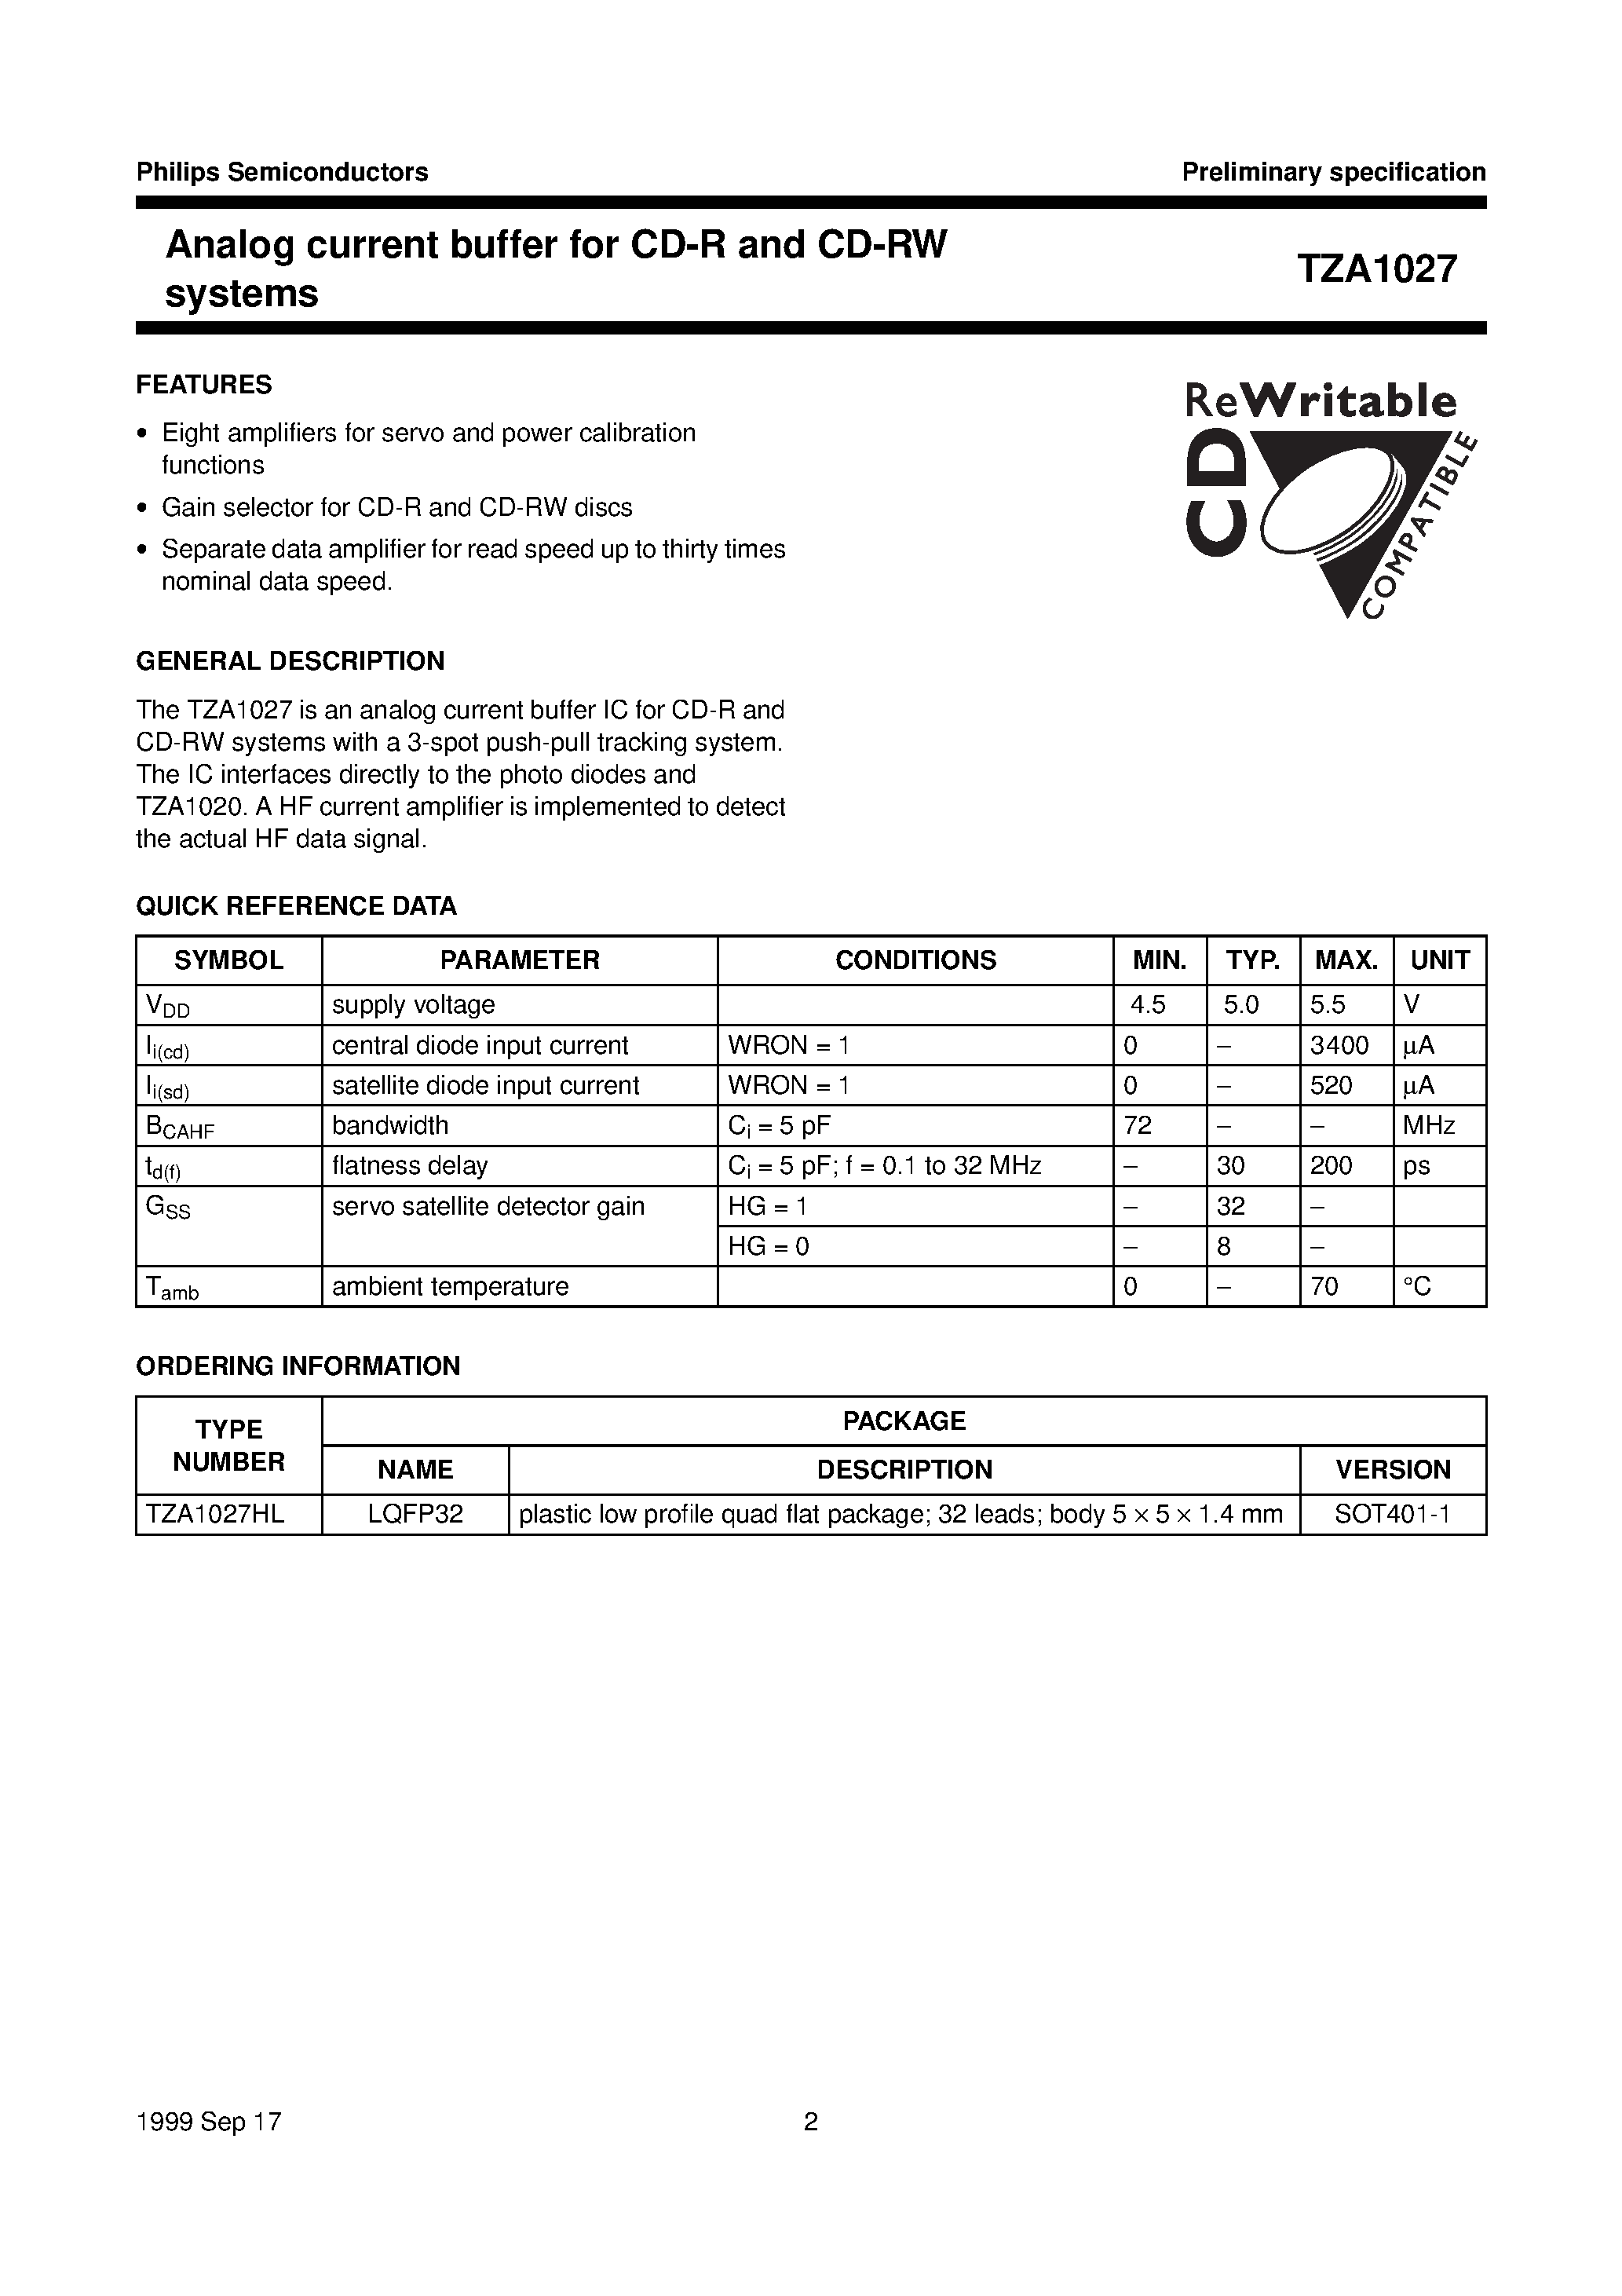 Datasheet TZA1027 - Analog current buffer for CD-R and CD-RW systems page 2